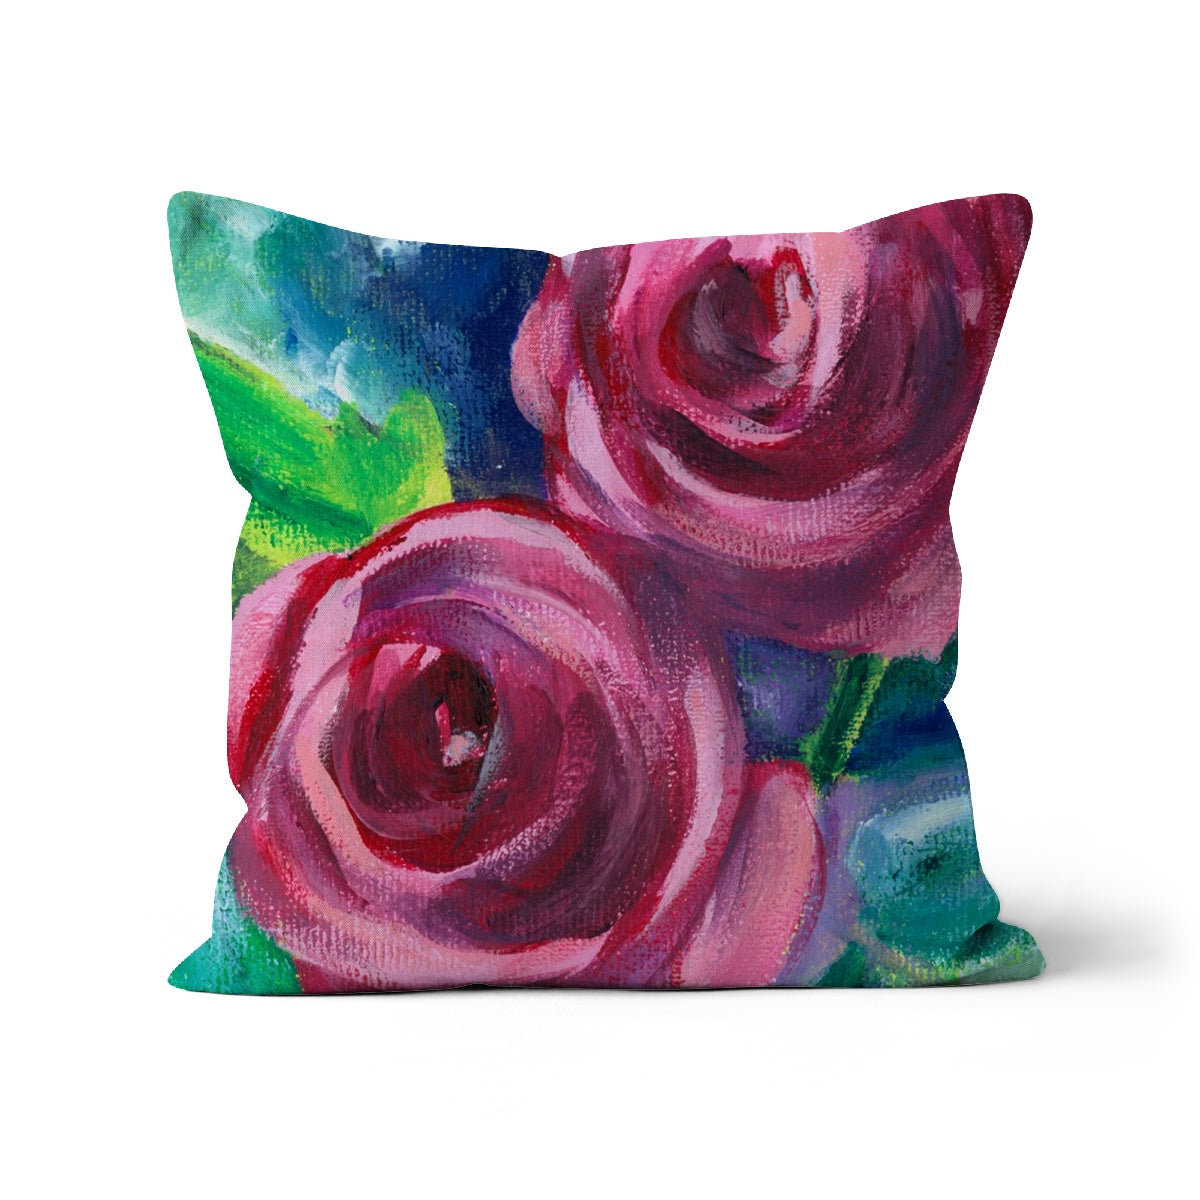 Vibrant floral cushion featuring two red roses